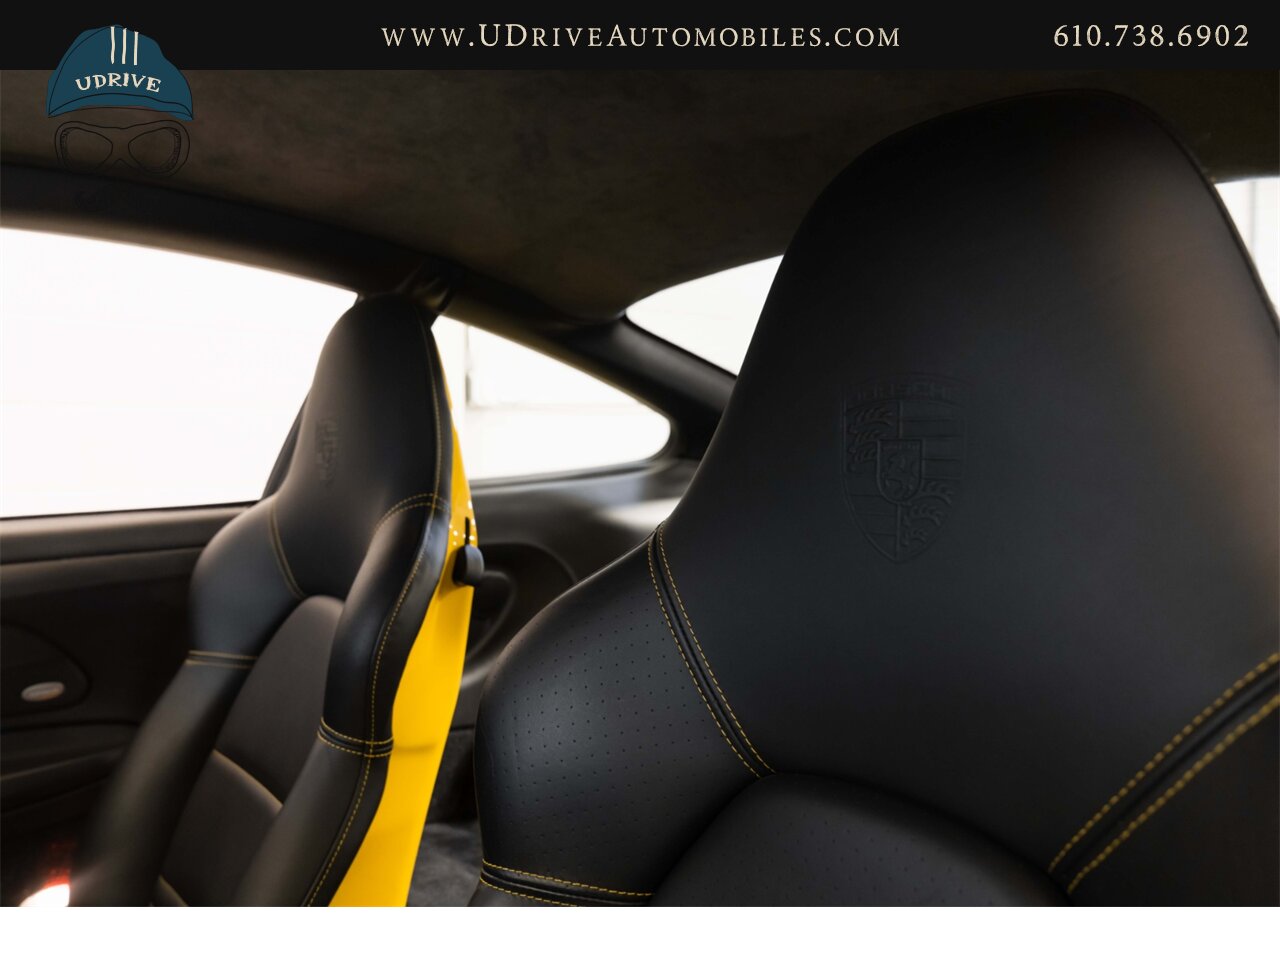 2005 Porsche 911 GT3 996 Speed Yellow Sport Seats Pntd Hardbacks  Pntd Console Deviating Stitch Yellow Accents Throughout - Photo 36 - West Chester, PA 19382